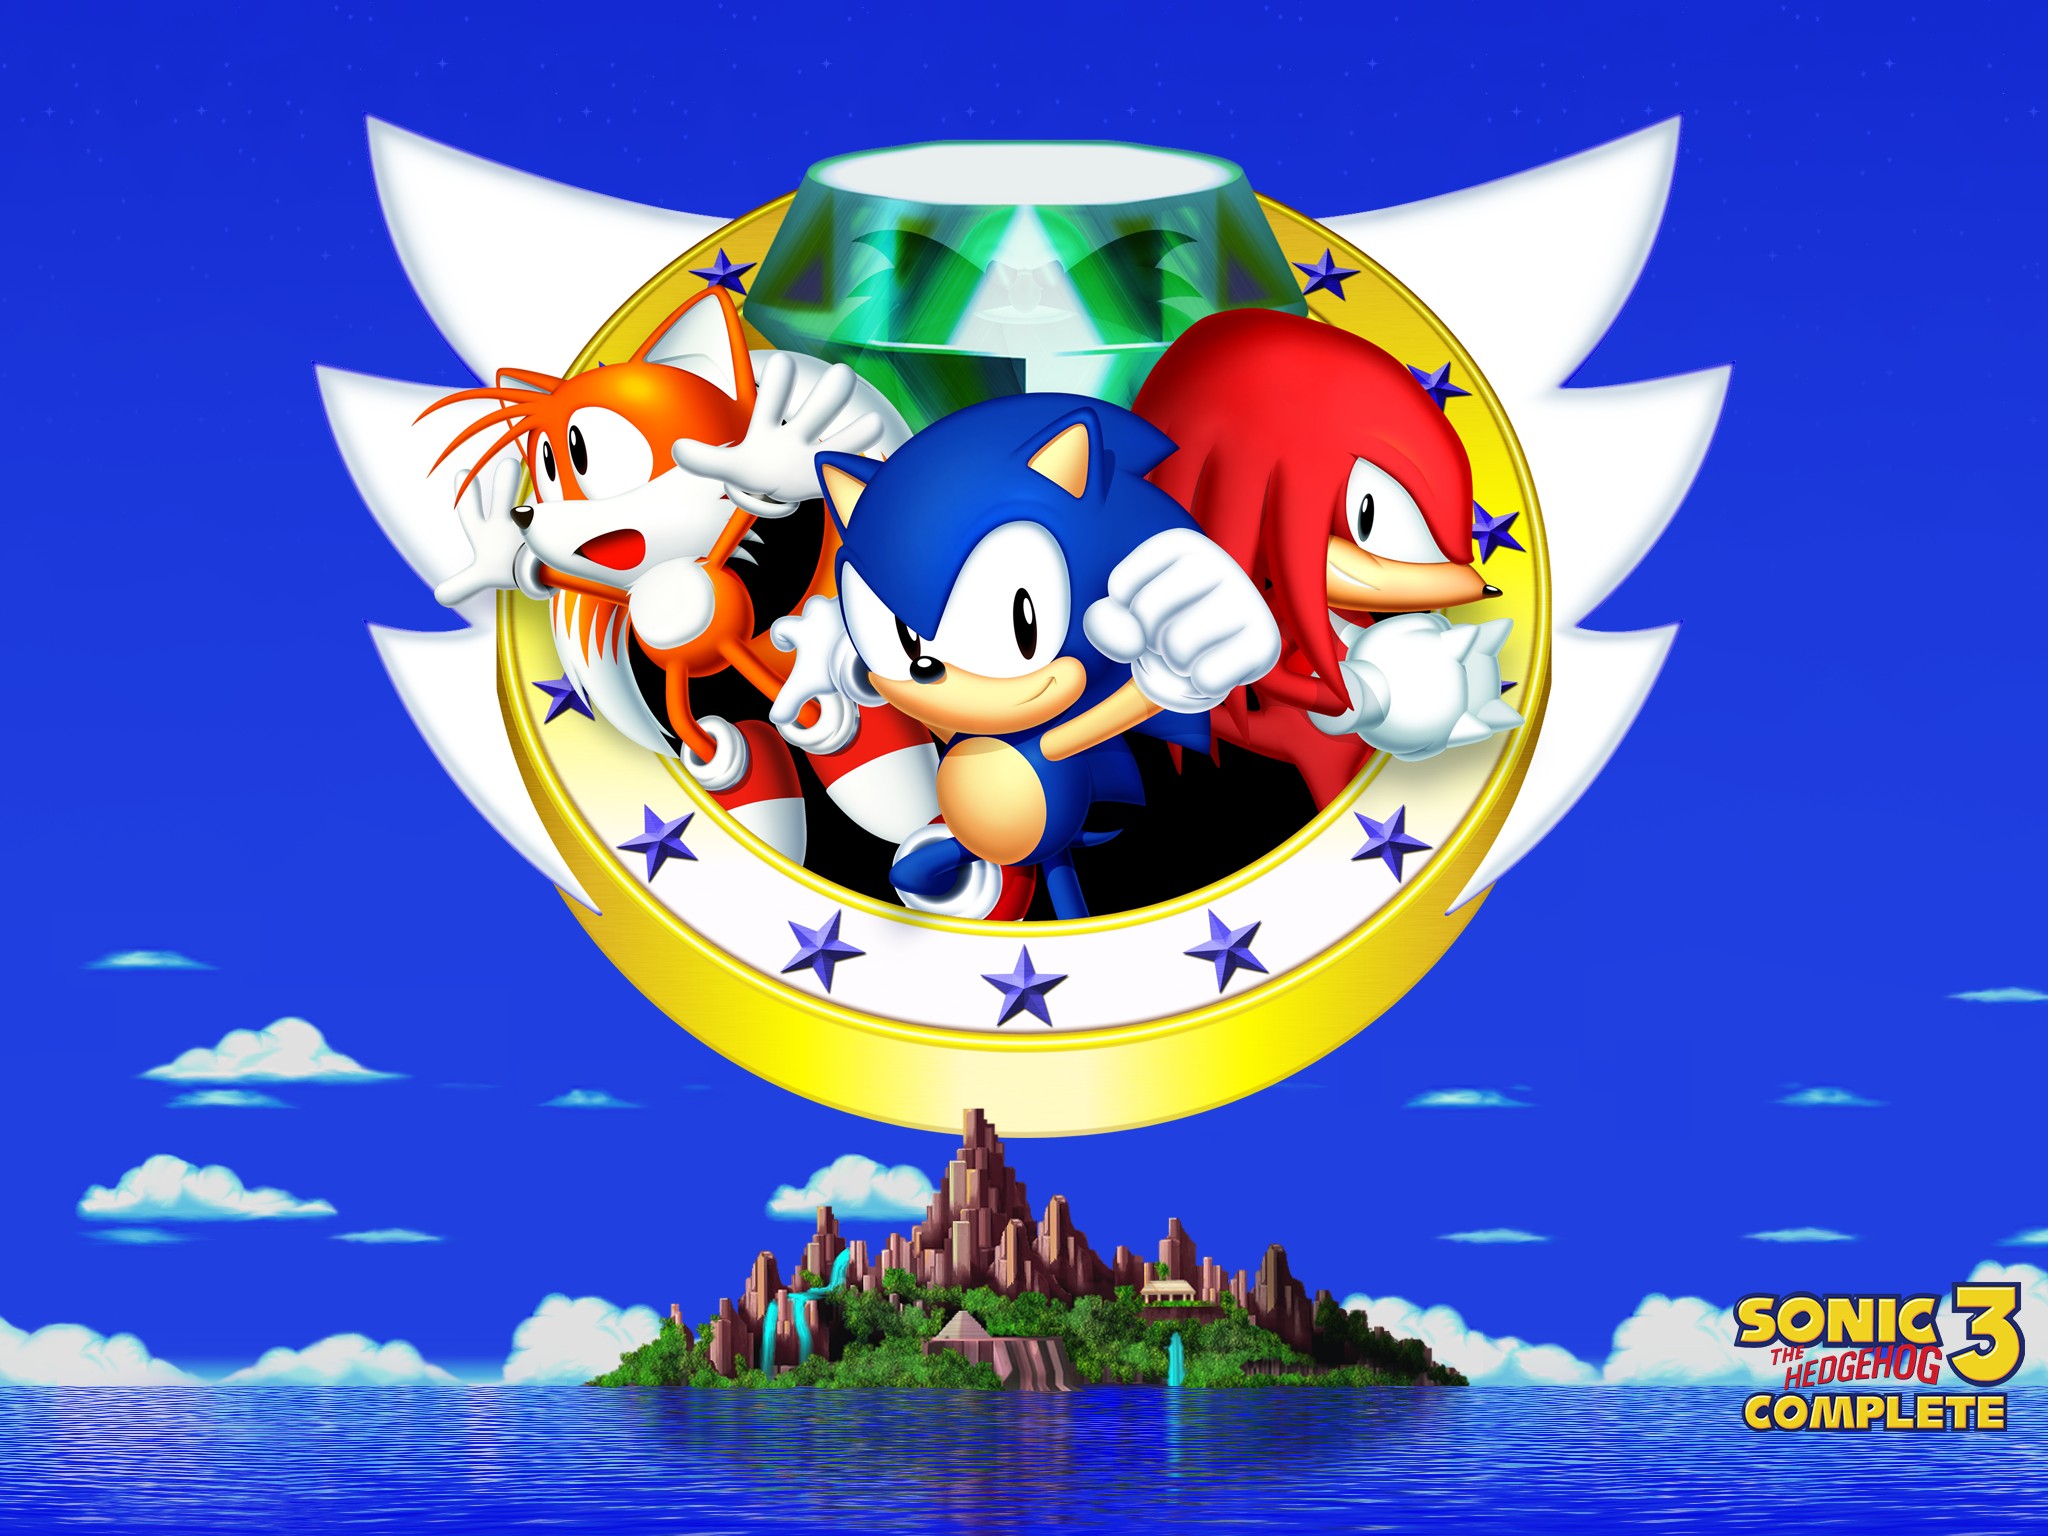 Sonic 3 and knuckles steam version фото 111